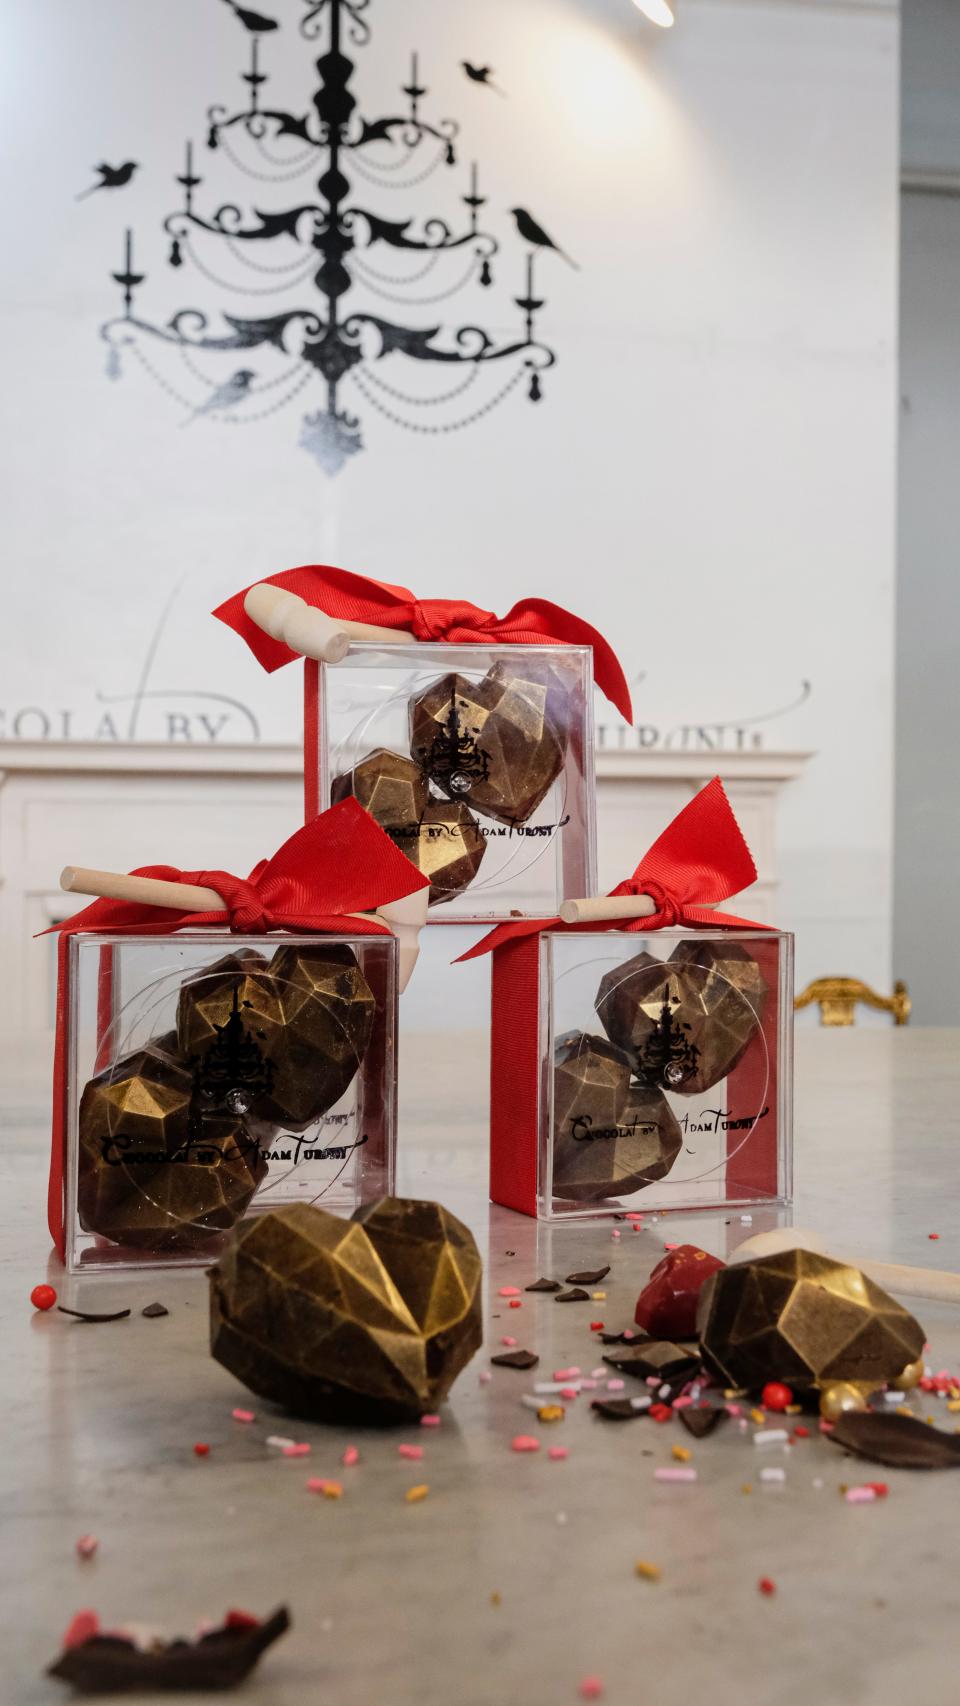 These dark chocolate hearts come dusted with gold and with a small wooden mallet to bust them open like piñatas with even more sweet treats for lovers to share... or for the broken-hearted to smash and indulge.